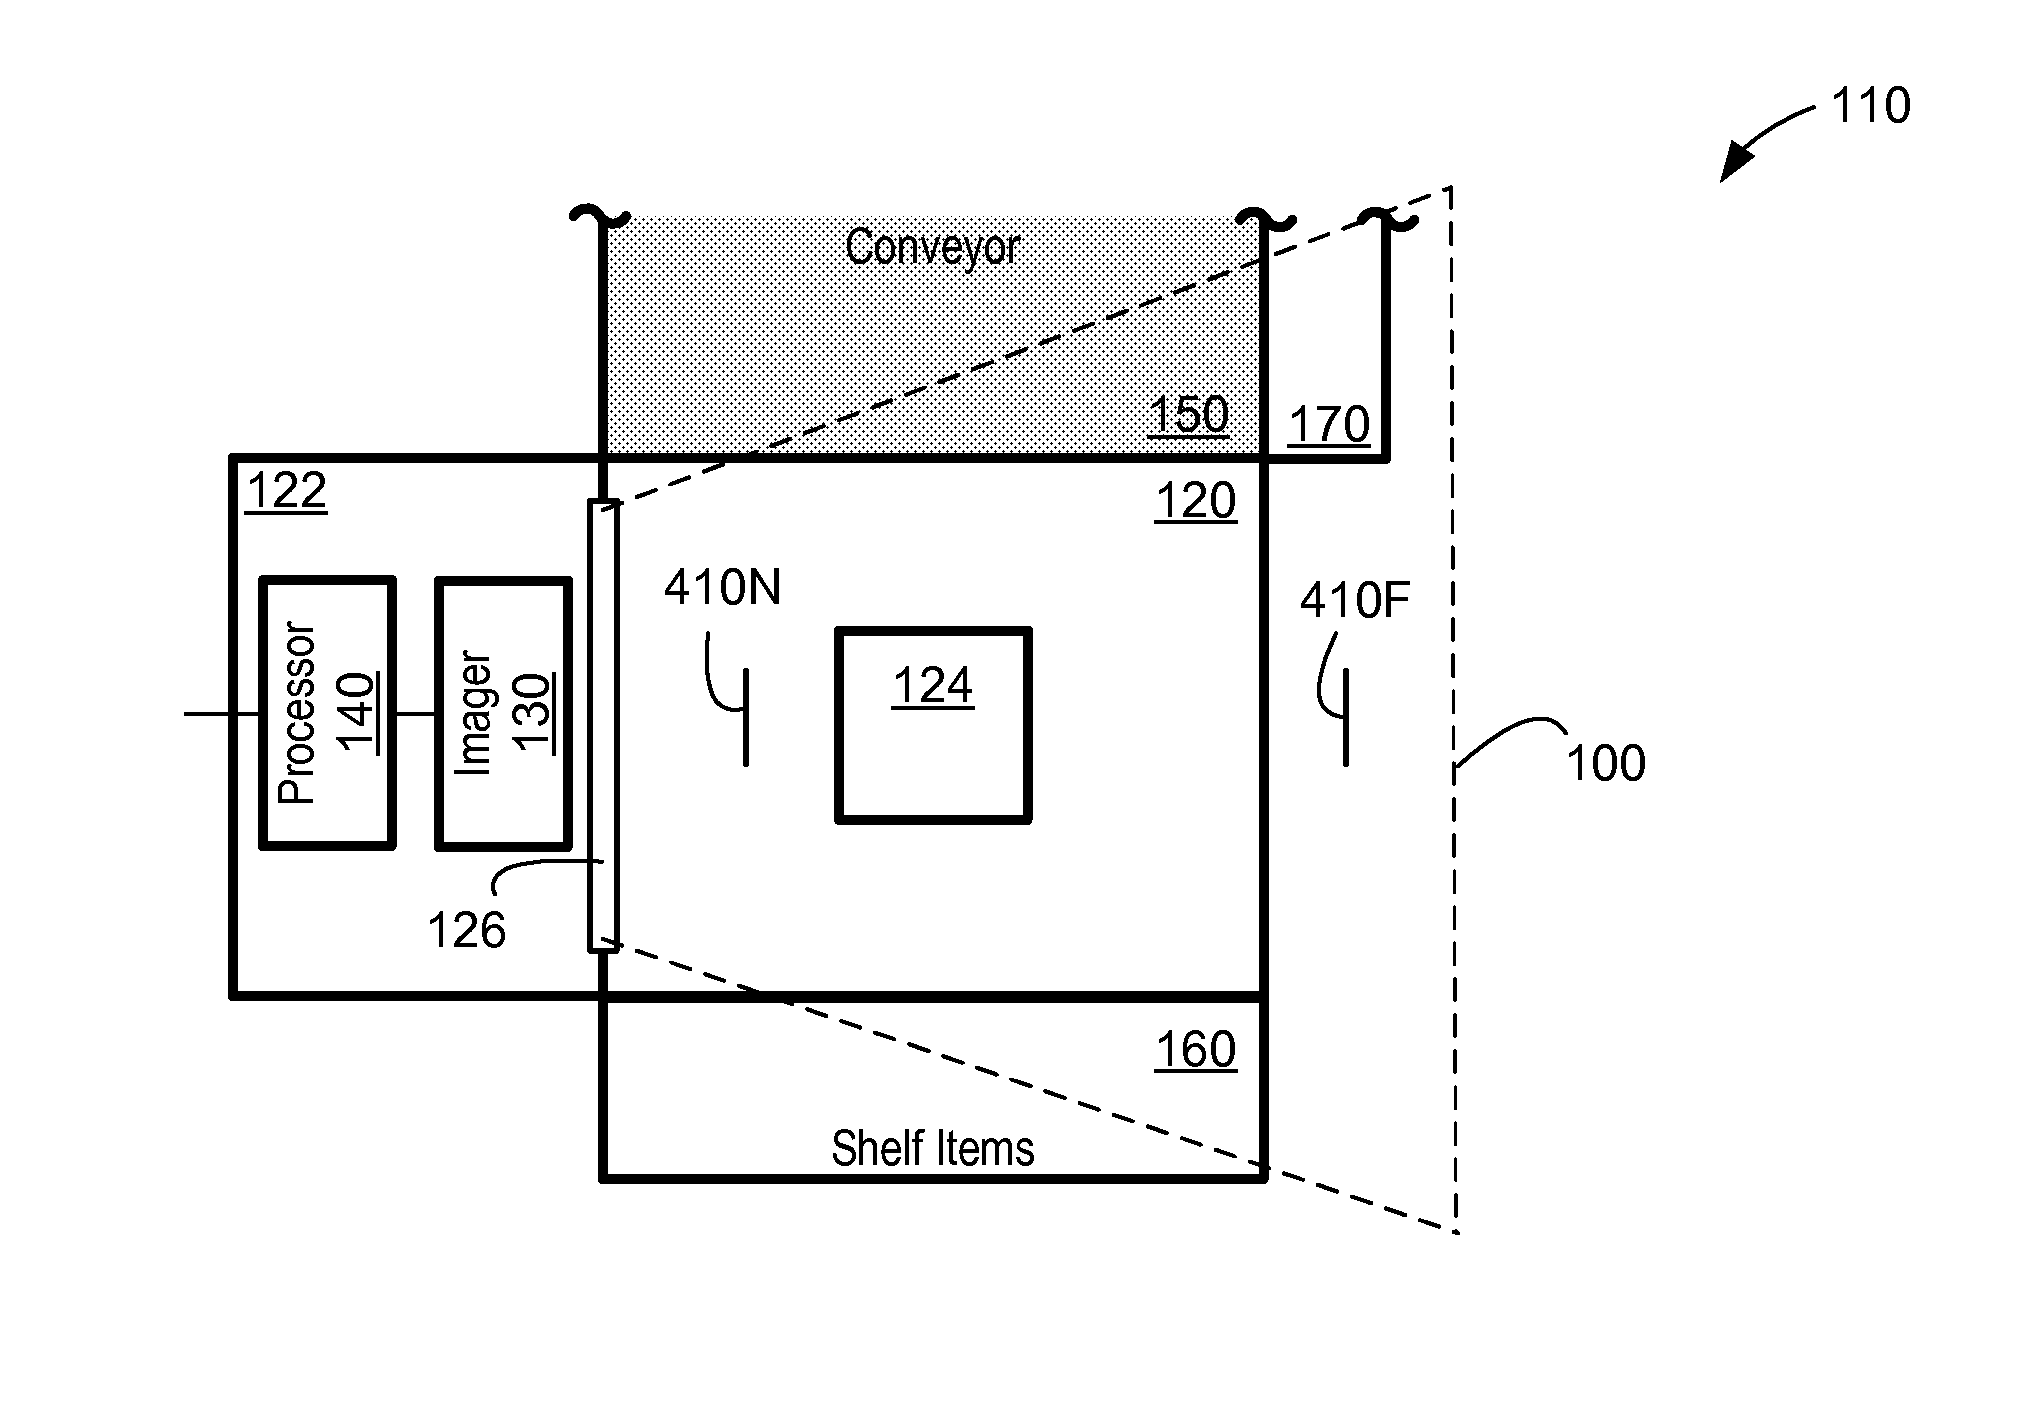 Systems and methods for selectively masking a scan volume of a data reader